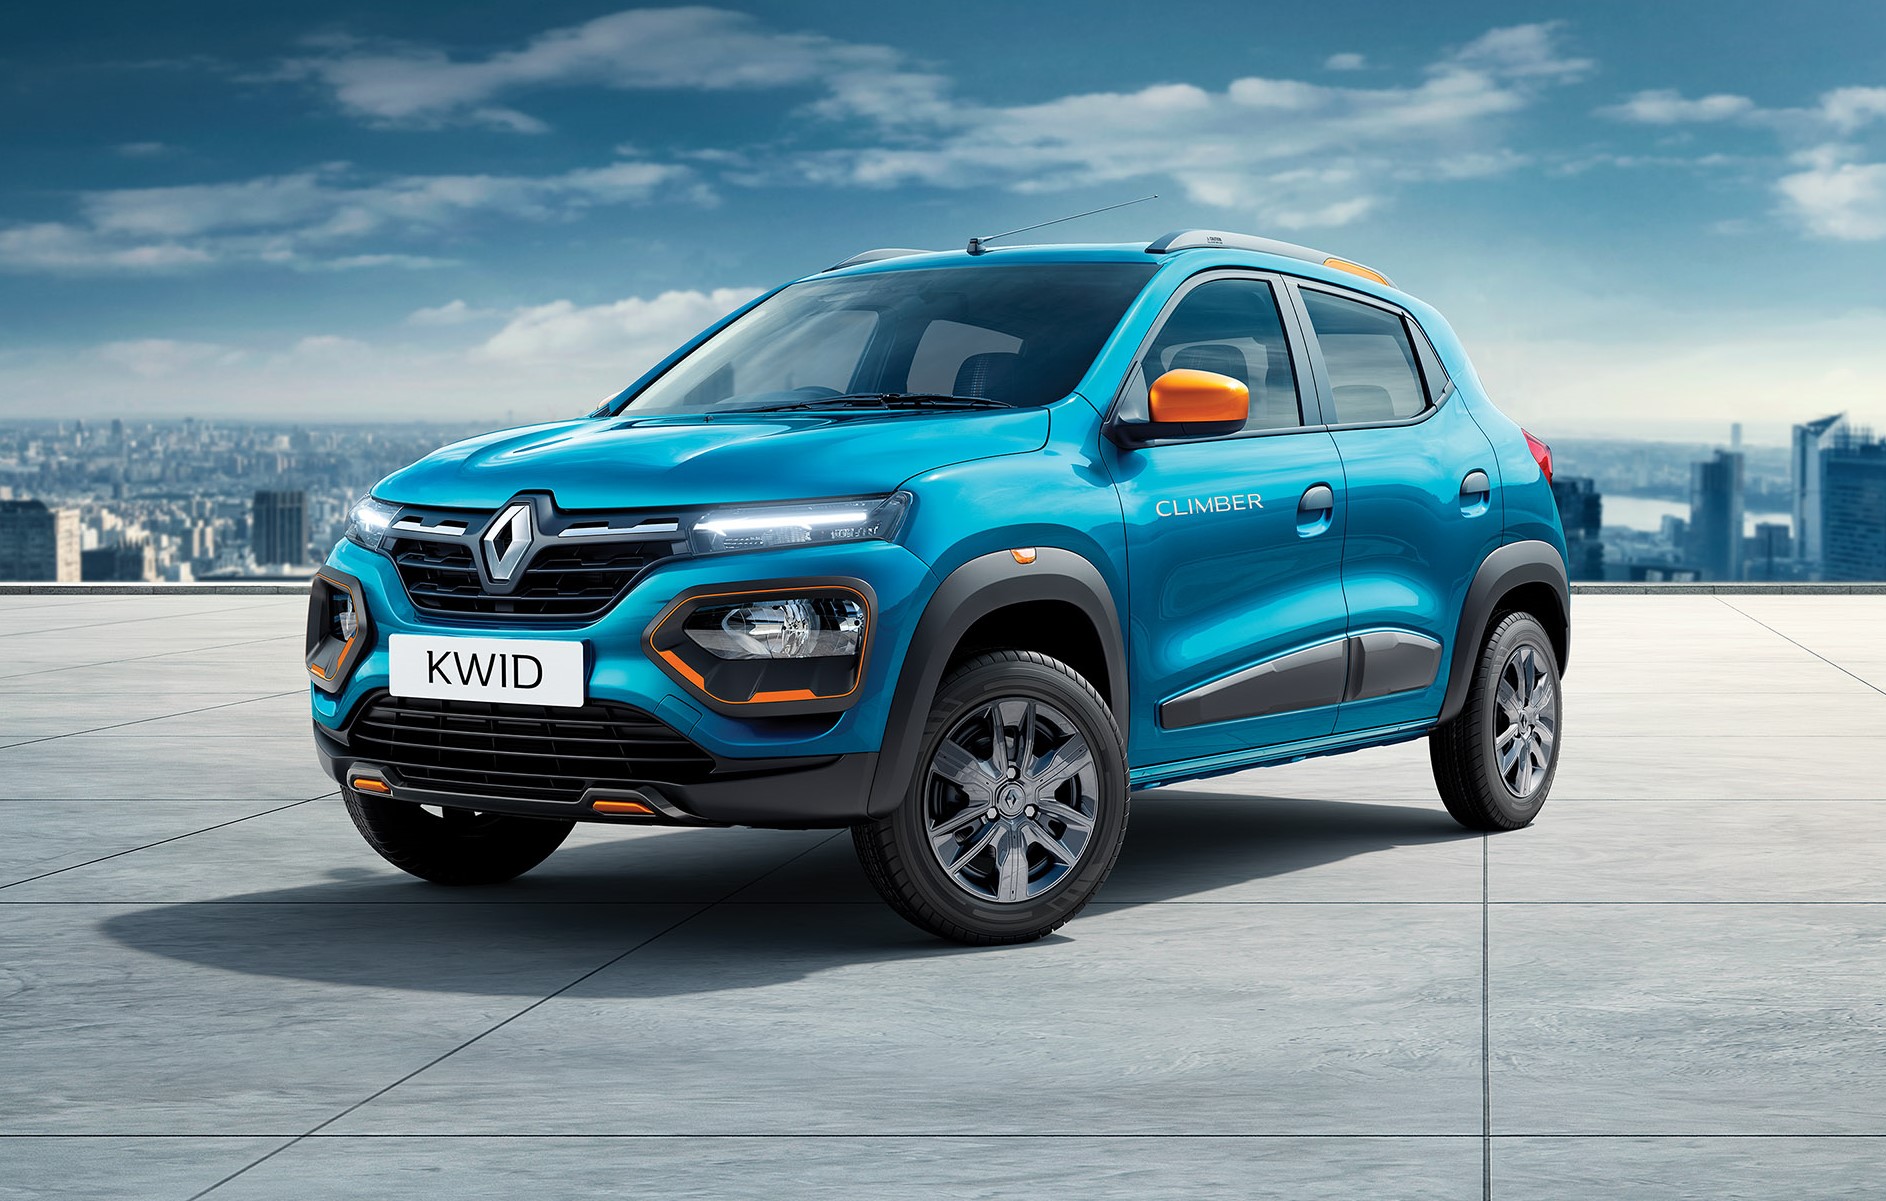 BS6 compliant Renault Kwid & Triber launched in India ShiftingGears